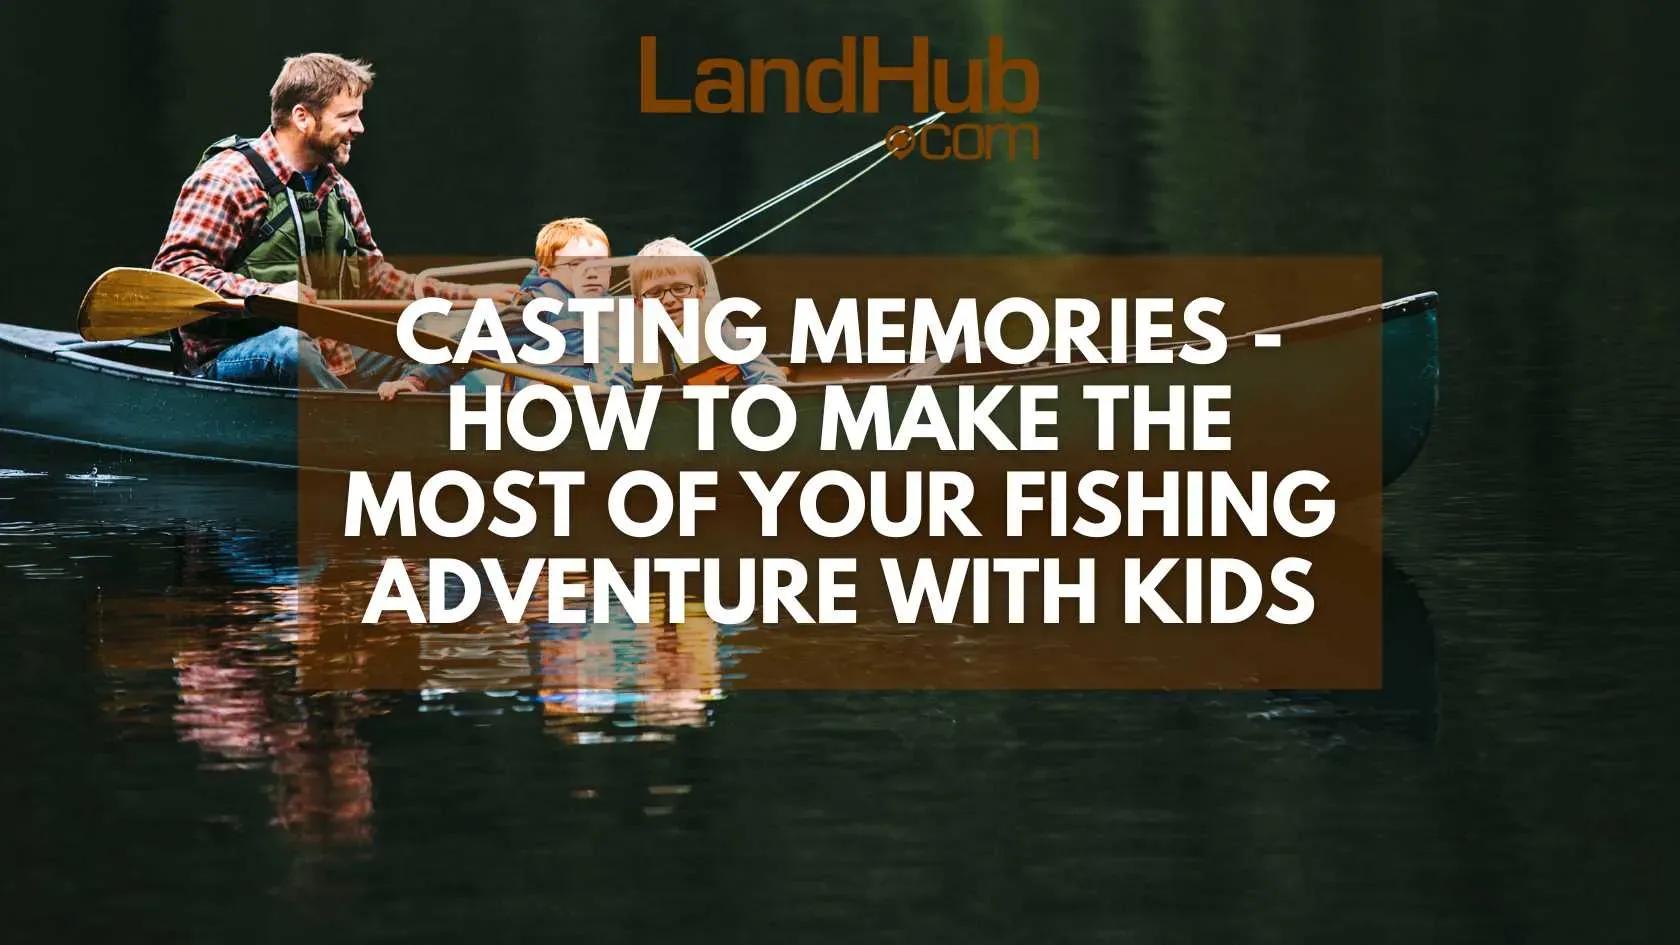 casting memories - how to make the most of your fishing adventure with kids